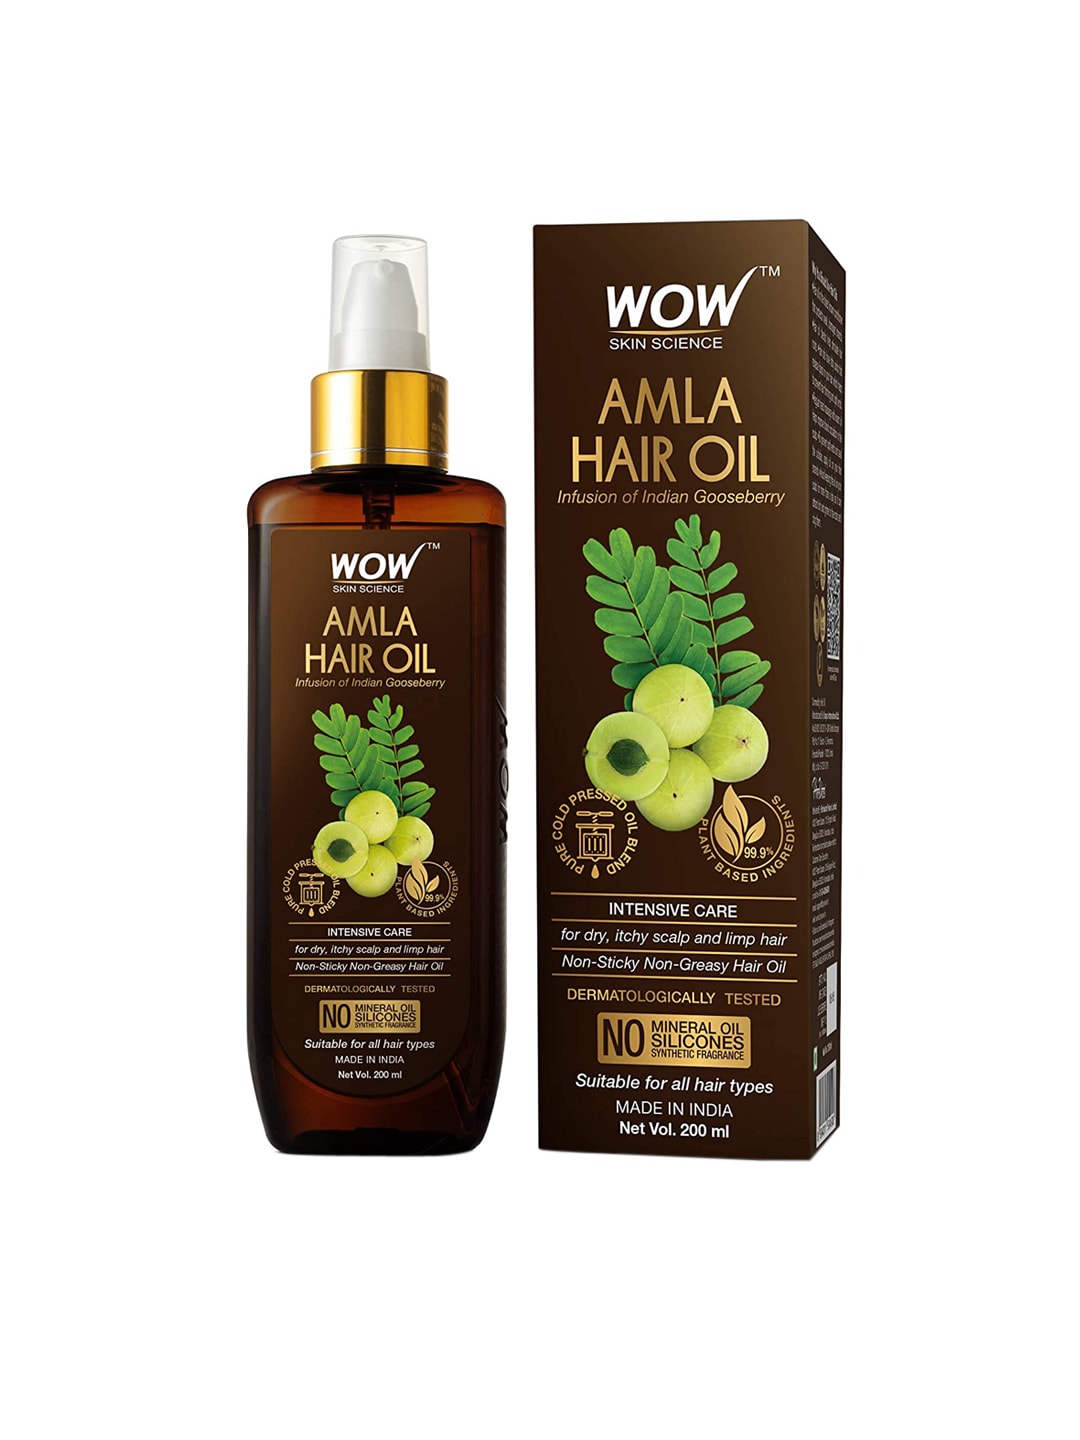 WOW SKIN SCIENCE Pure Cold Pressed Amla Hair Oil - 200ml Price in India